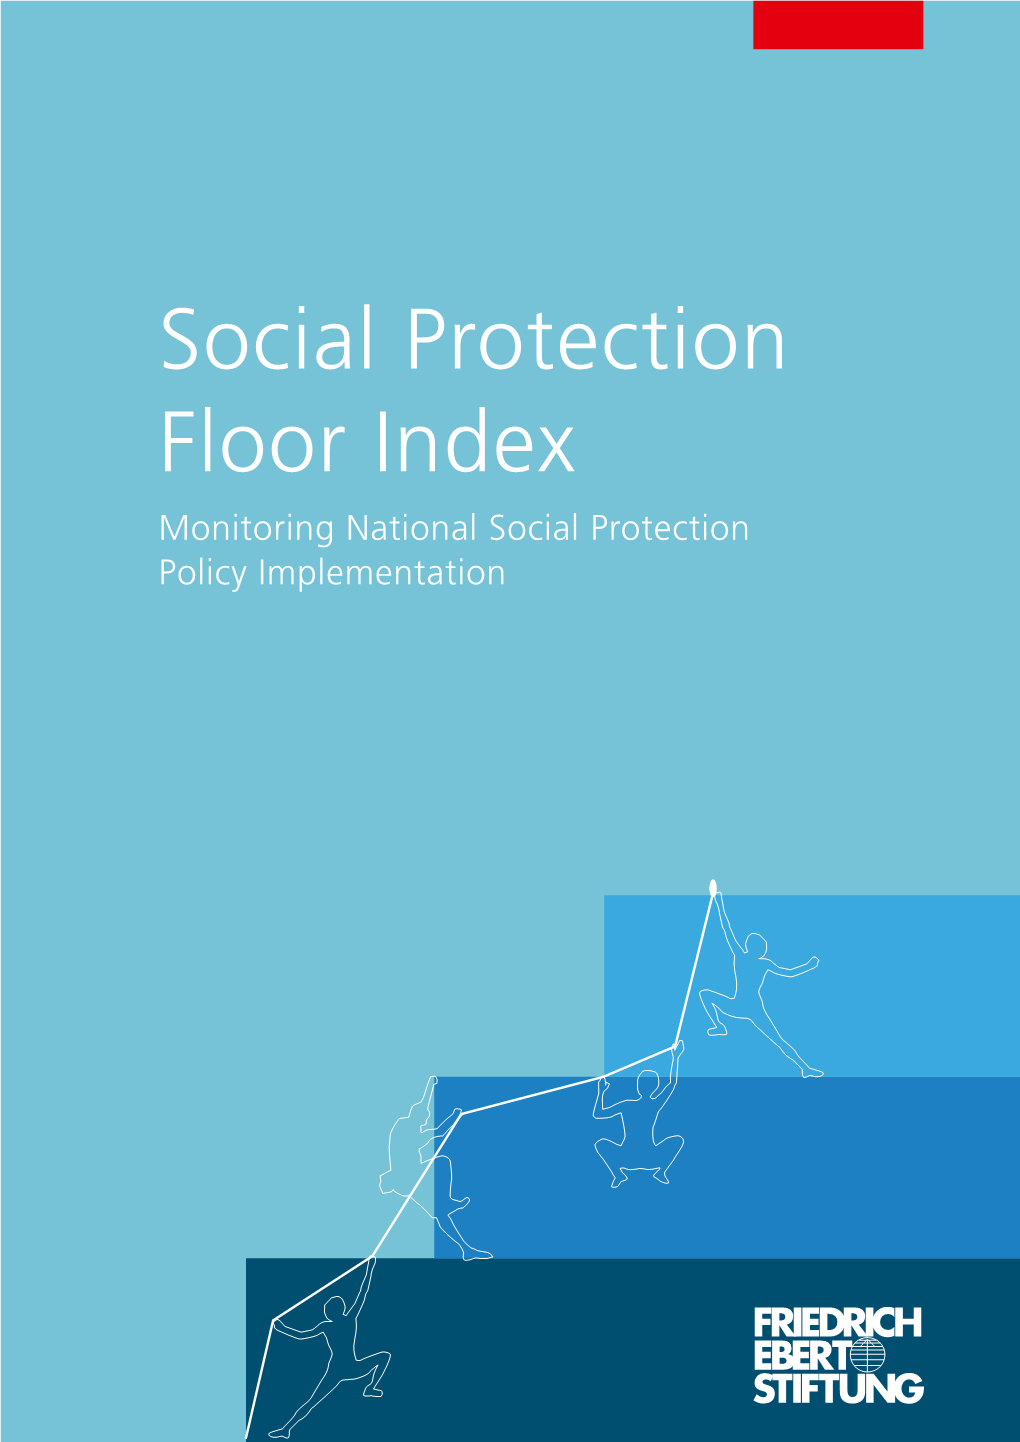 Social Protection Floor Index